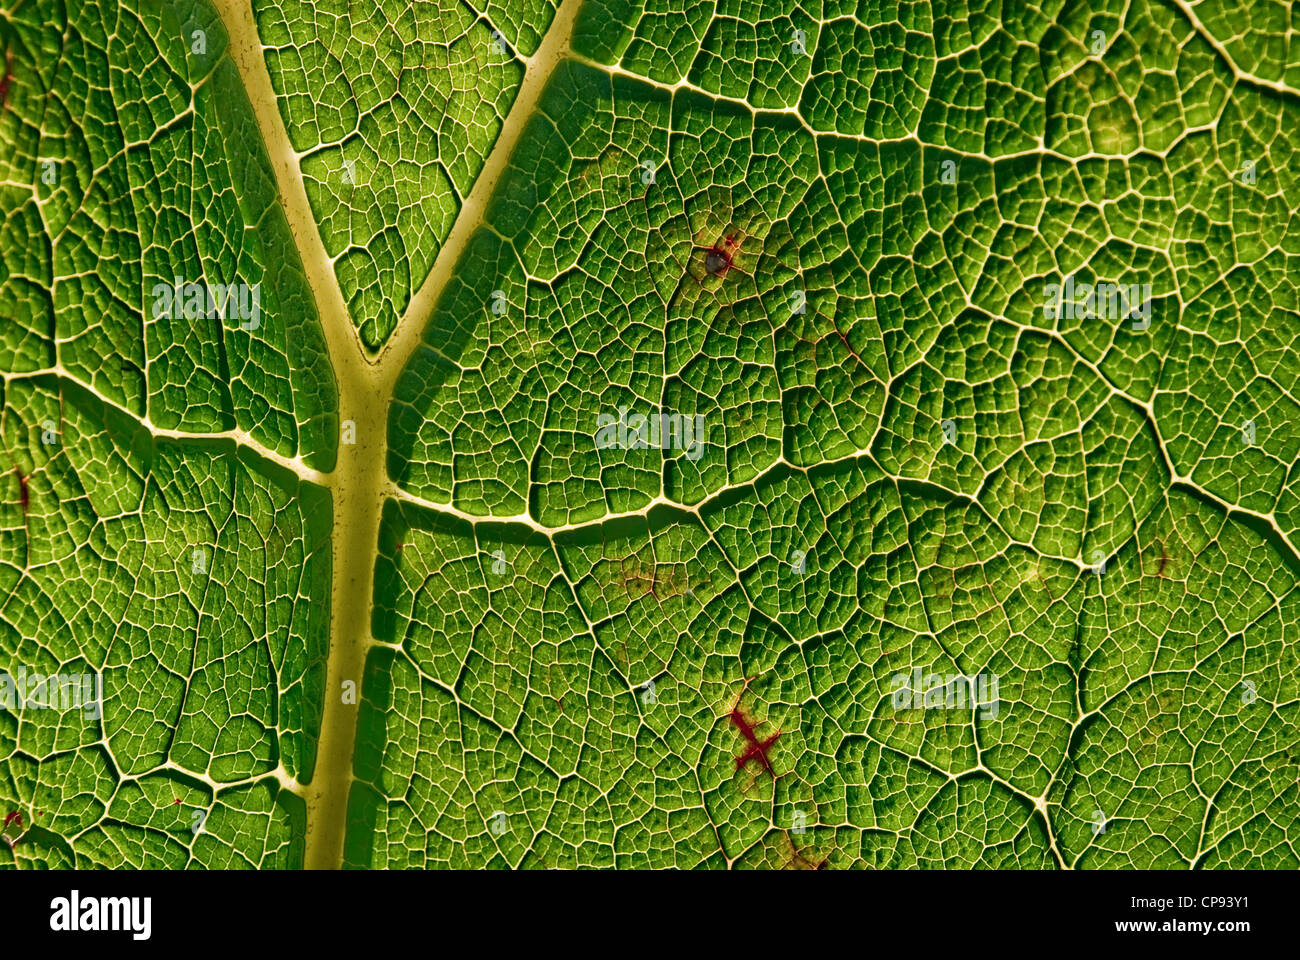 The network of a veins and capillaries of a Gunnerer Gunnerea leaf appear like a miniature landscape, Stock Photo